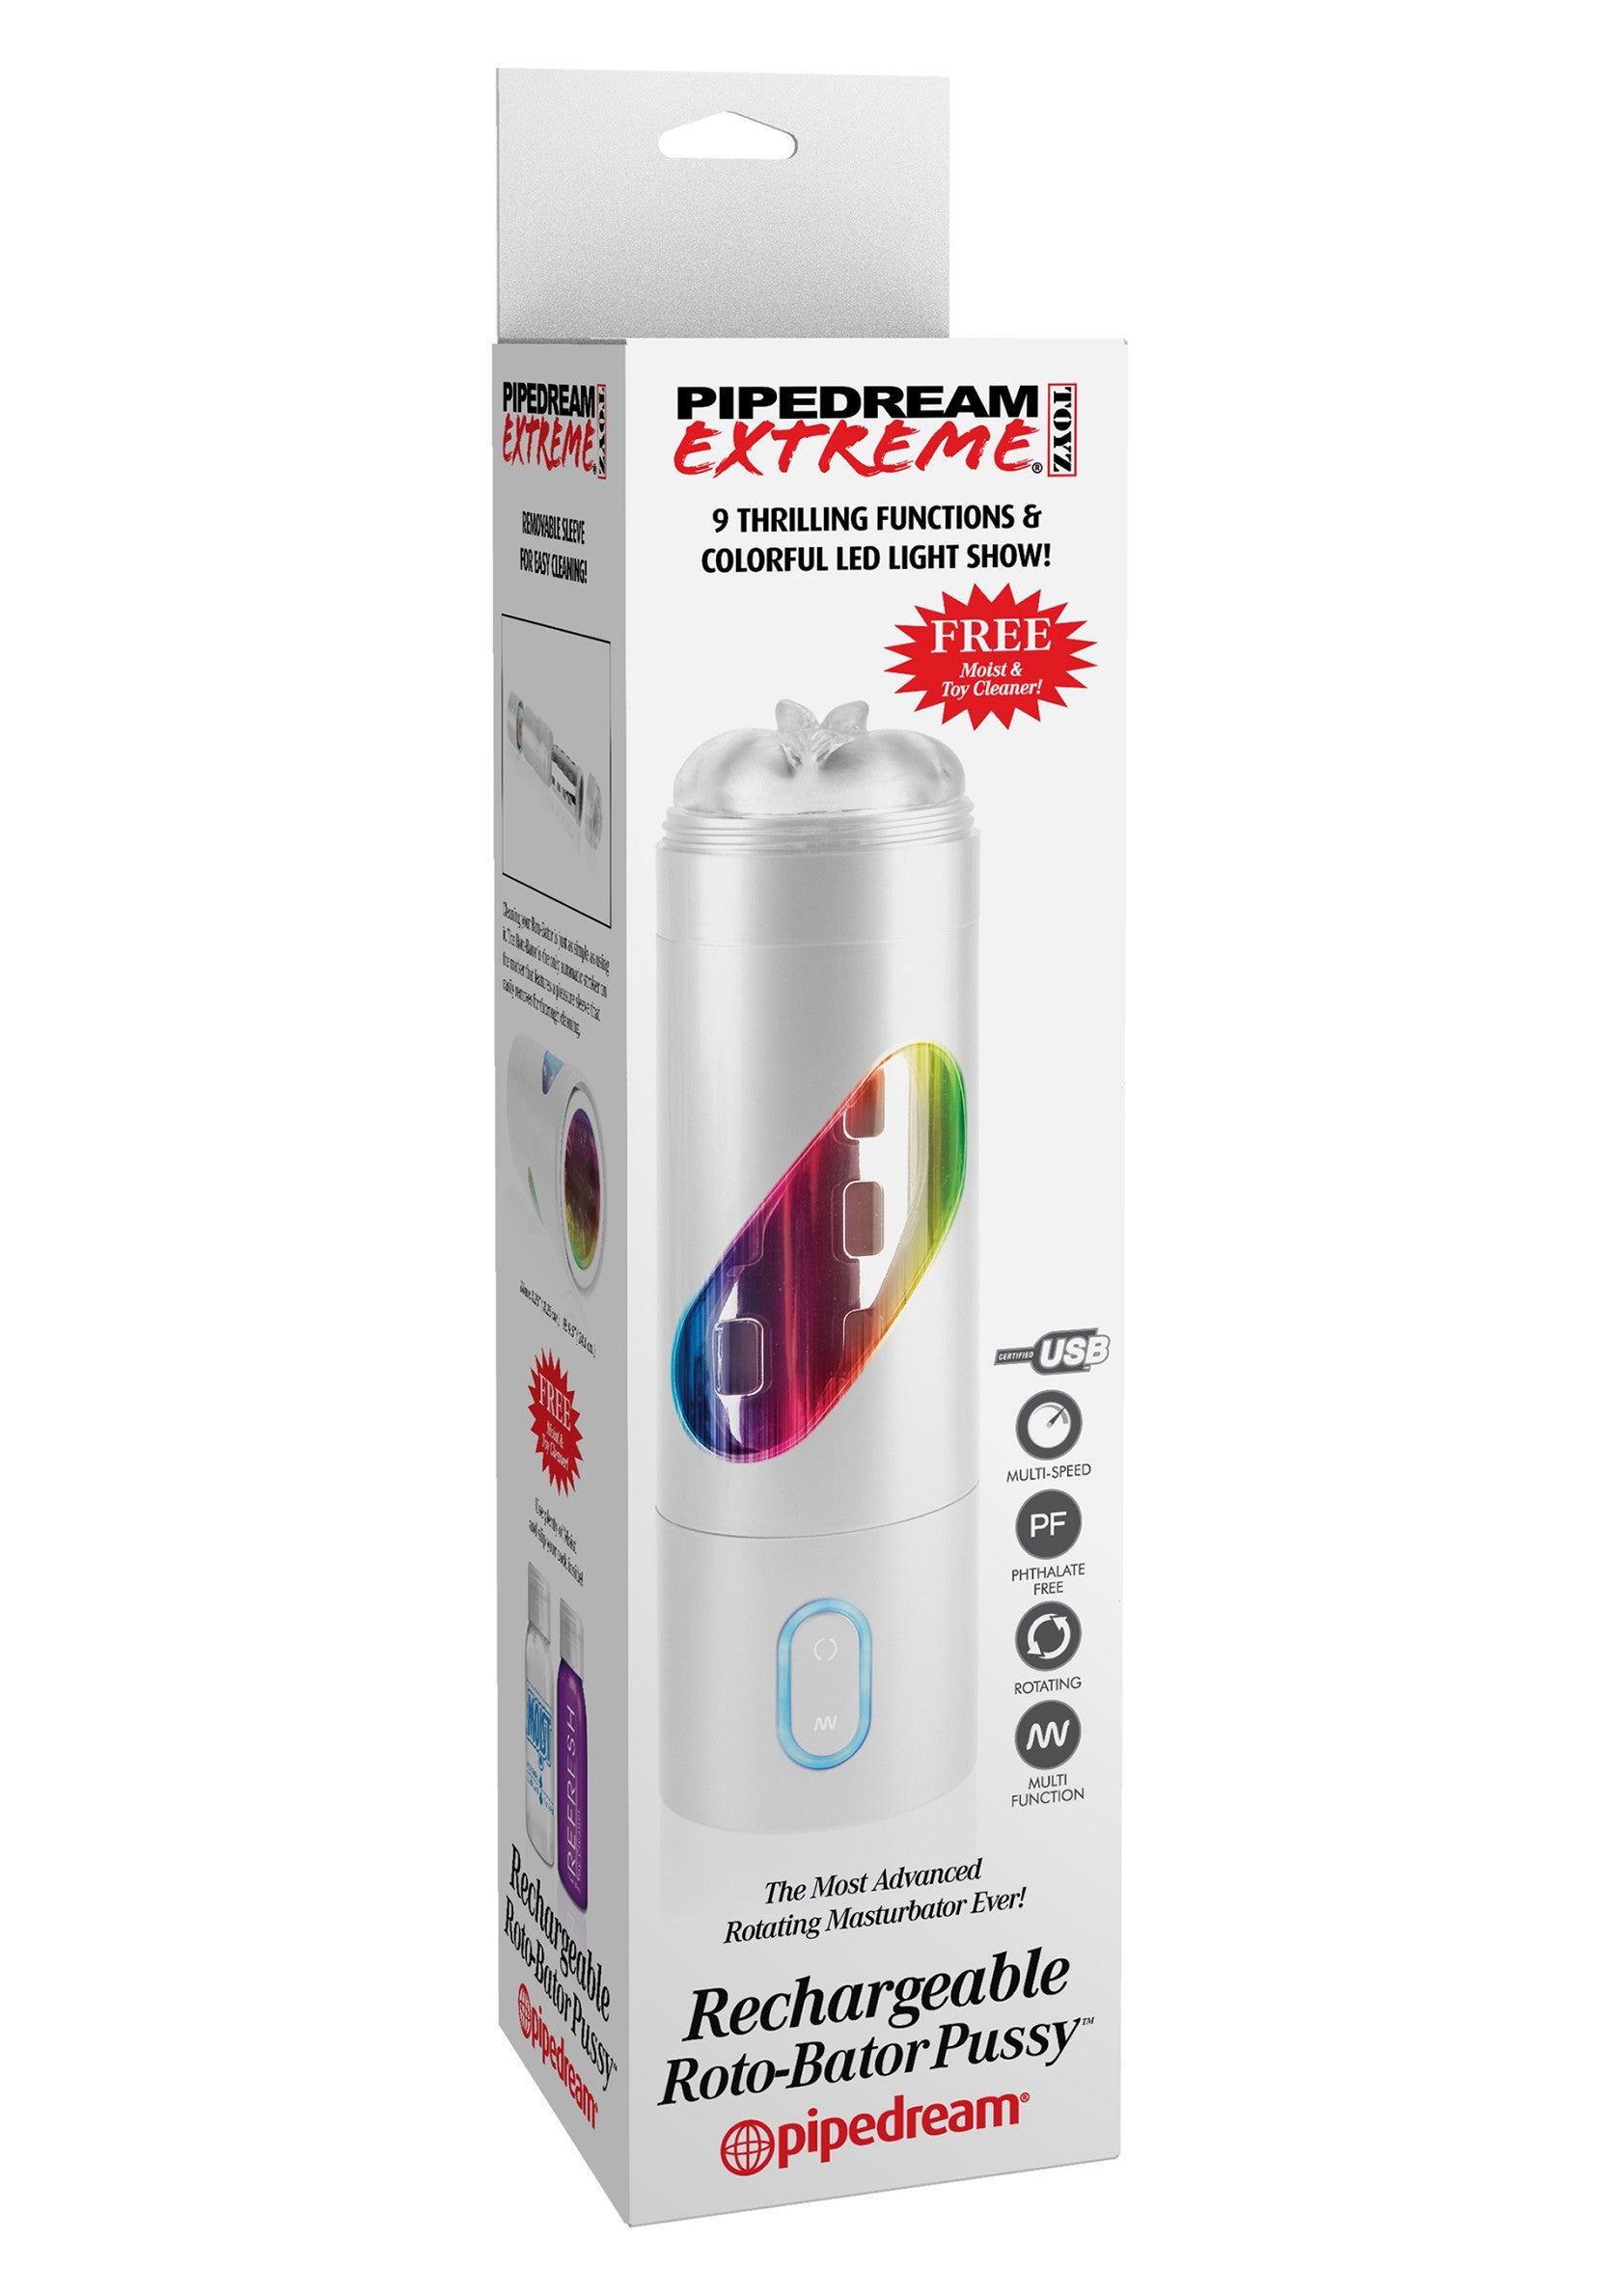 Pipedream PDX Extreme Rechargeable Roto-Bator Pussy SKIN - 1